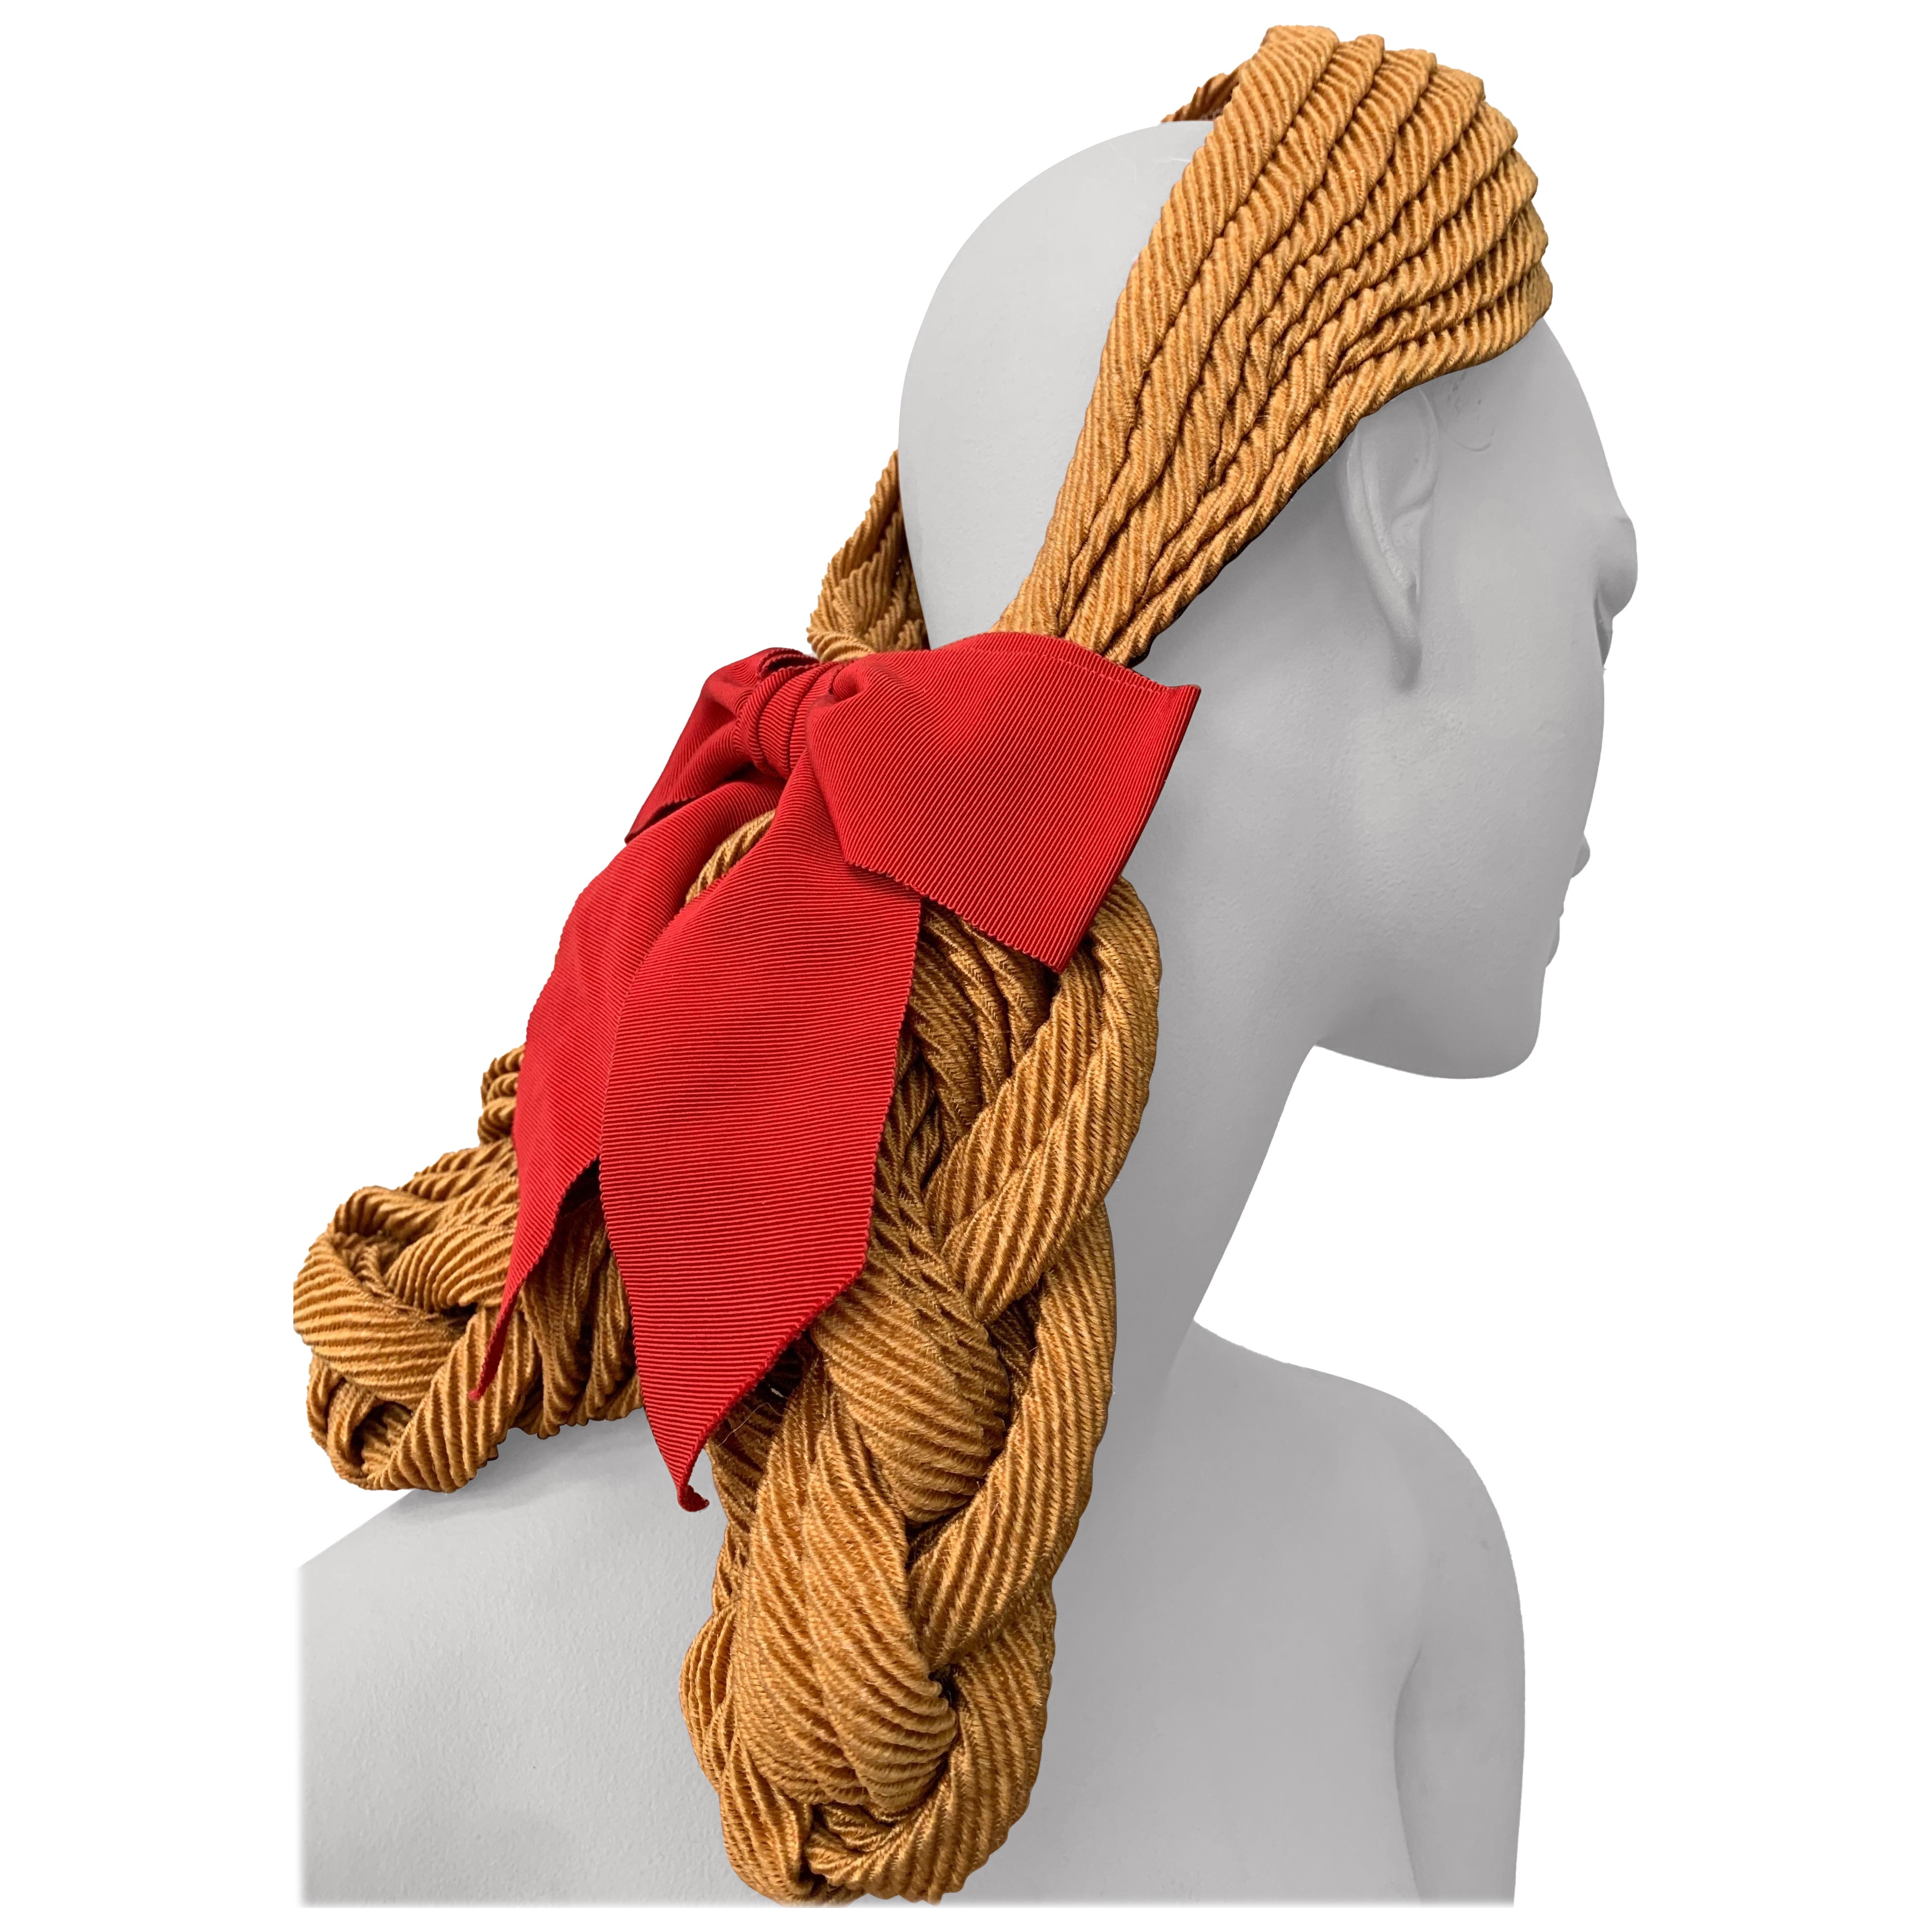 1940s Lilly Dache Couture "Double Chignon" Braided Straw Hat w Red Bow  For Sale